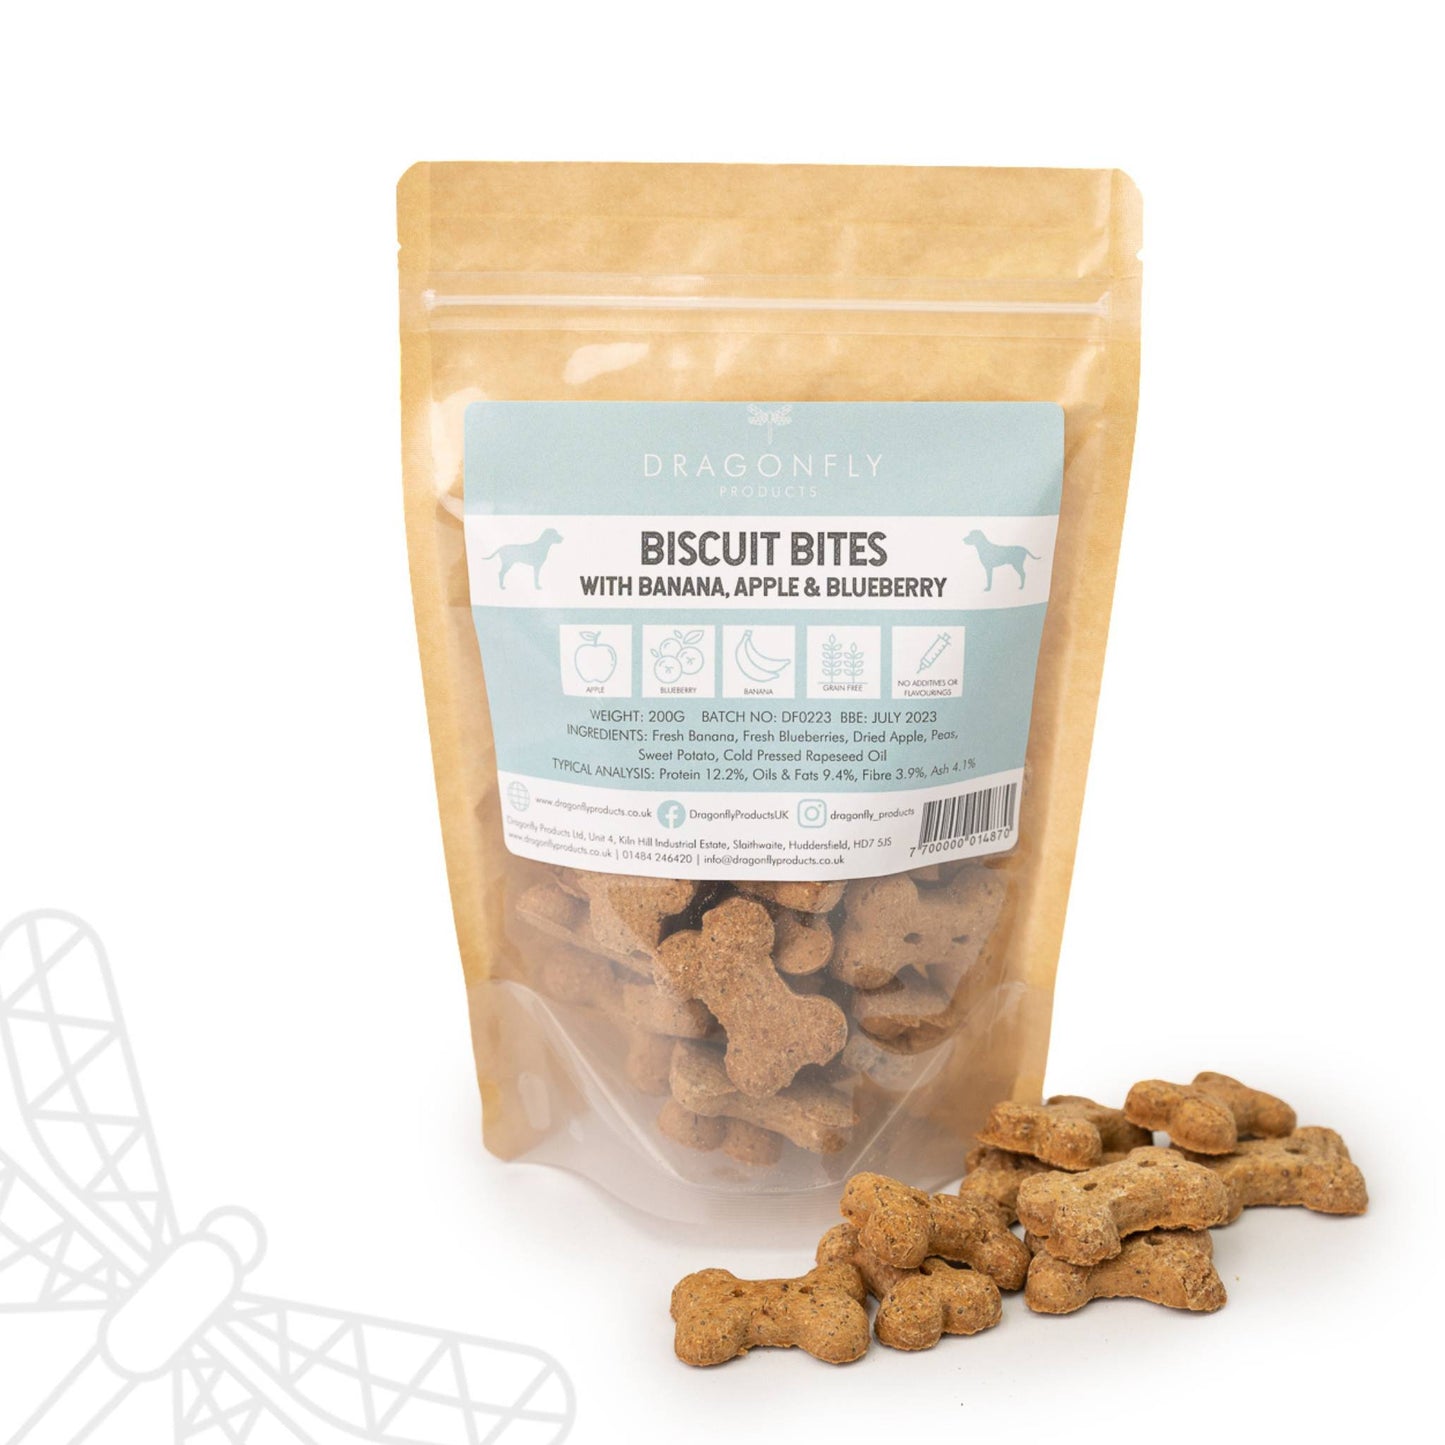 Biscuit bites for dogs